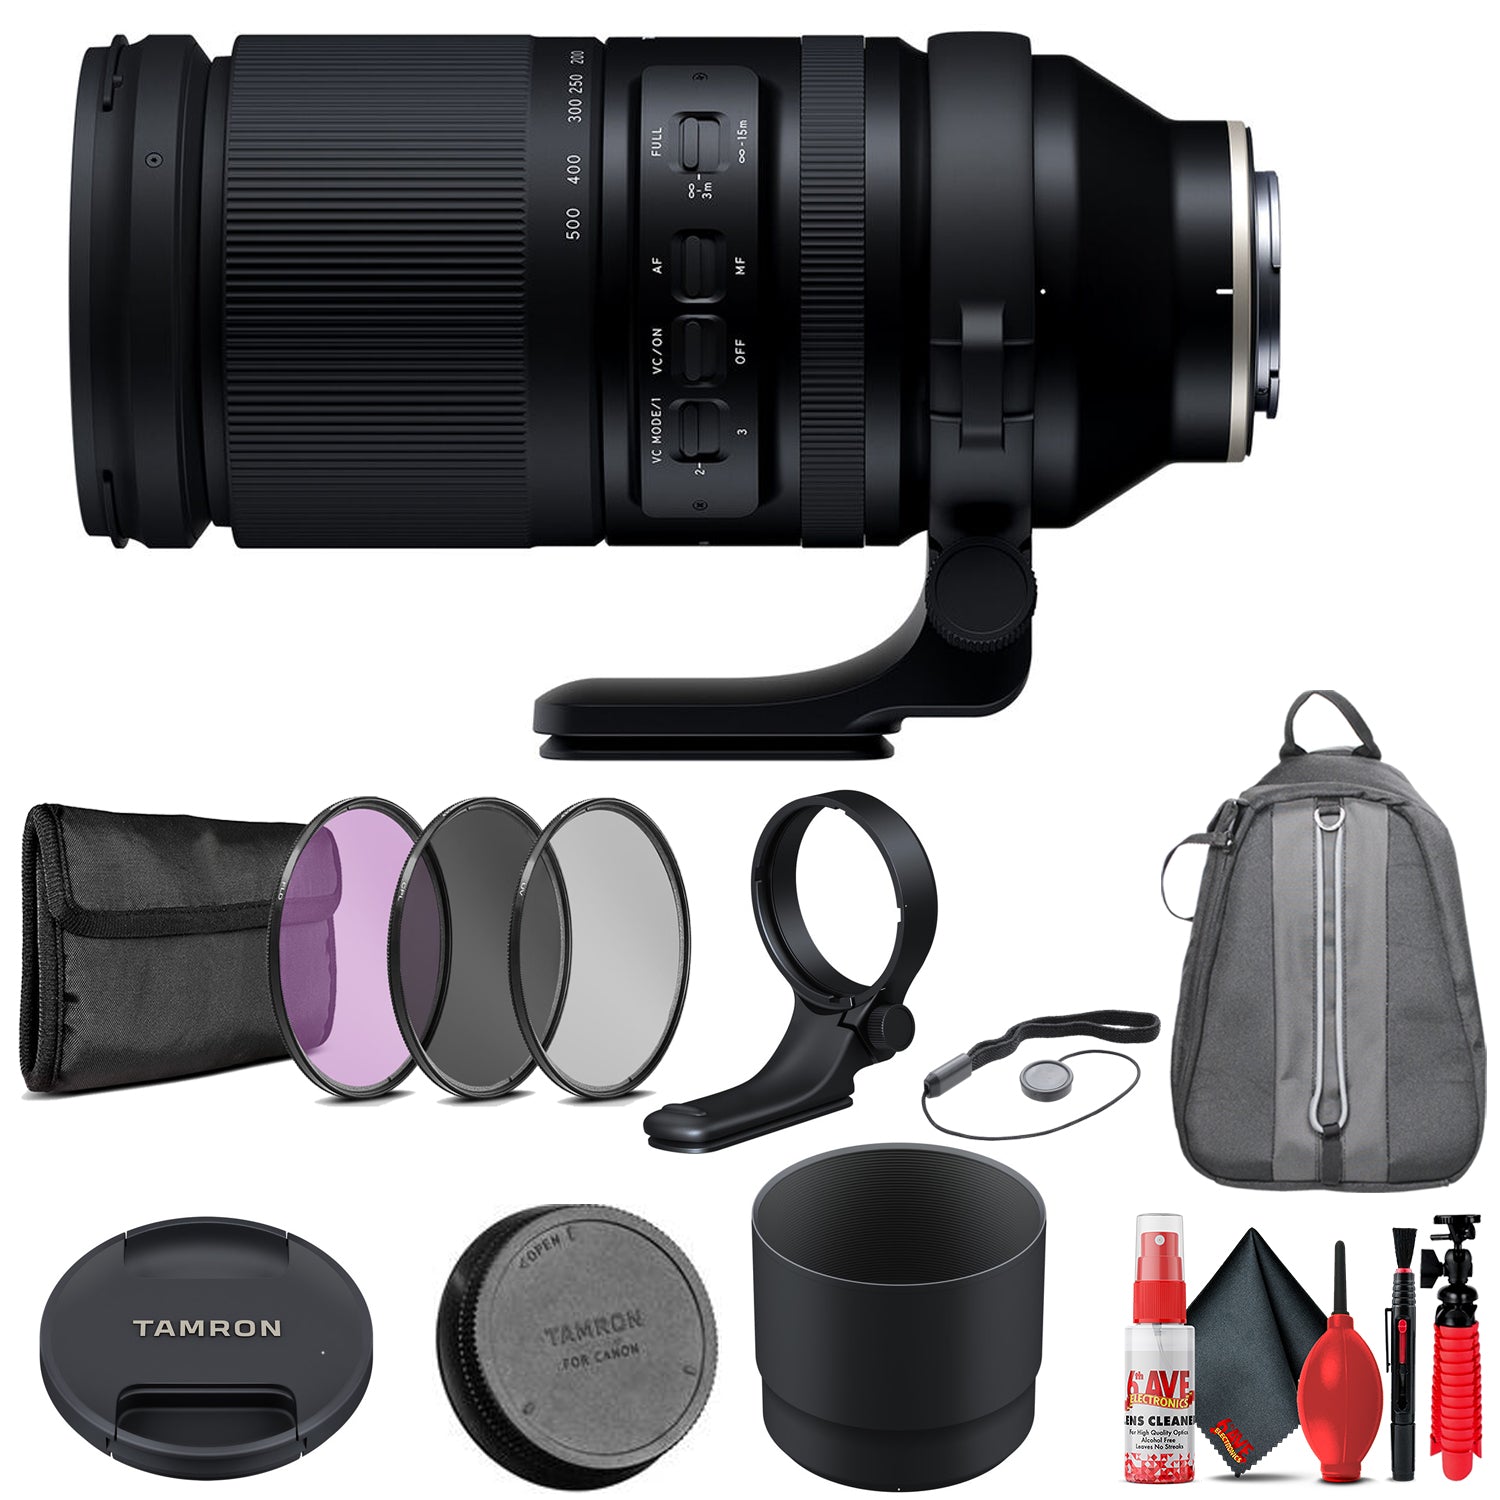 Tamron 150-500mm f/5-6.7 Di III VXD Lens for Sony + Accessory Kit (INT Model)